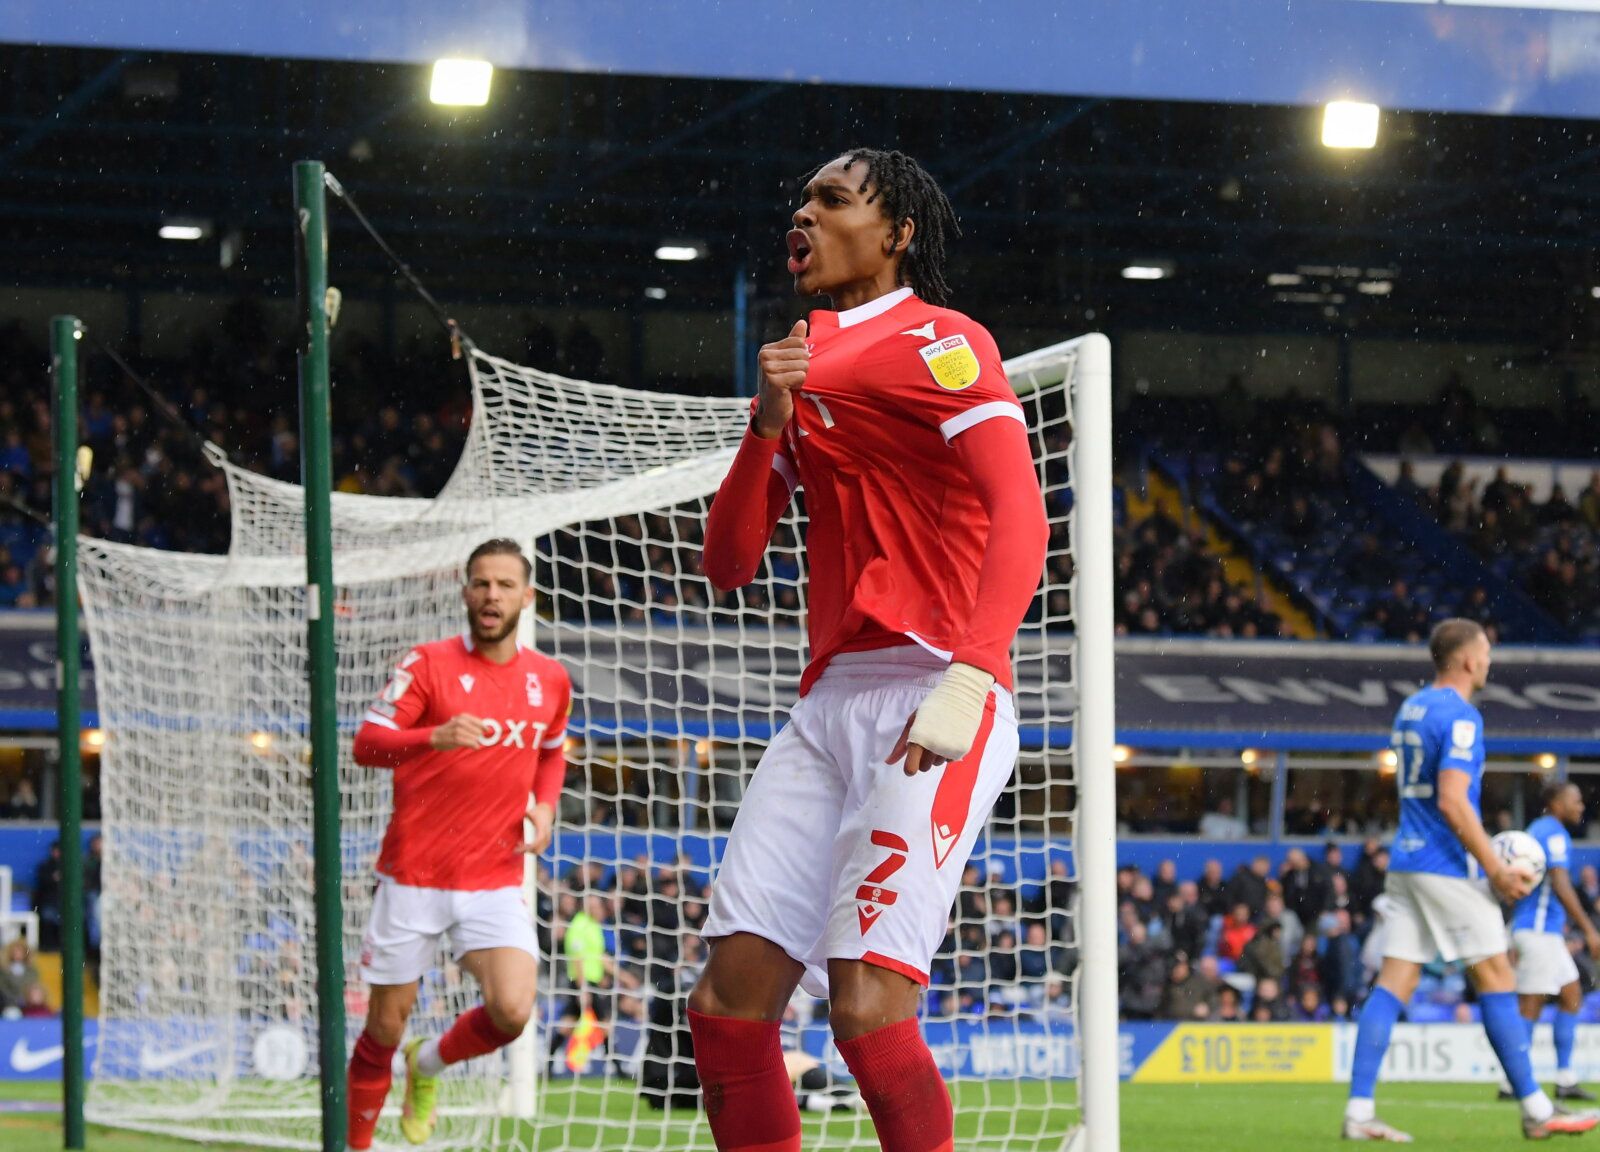 Soccer Football - Championship - Birmingham City v Nottingham Forest - St Andrew's, Birmingham, Britain - October 2, 2021  Nottingham Forest's Djed Spence celebrates scoring their third goal  Action Images/Paul Burrows  EDITORIAL USE ONLY. No use with unauthorized audio, video, data, fixture lists, club/league logos or "live" services. Online in-match use limited to 75 images, no video emulation. No use in betting, games or single club/league/player publications.  Please contact your account rep